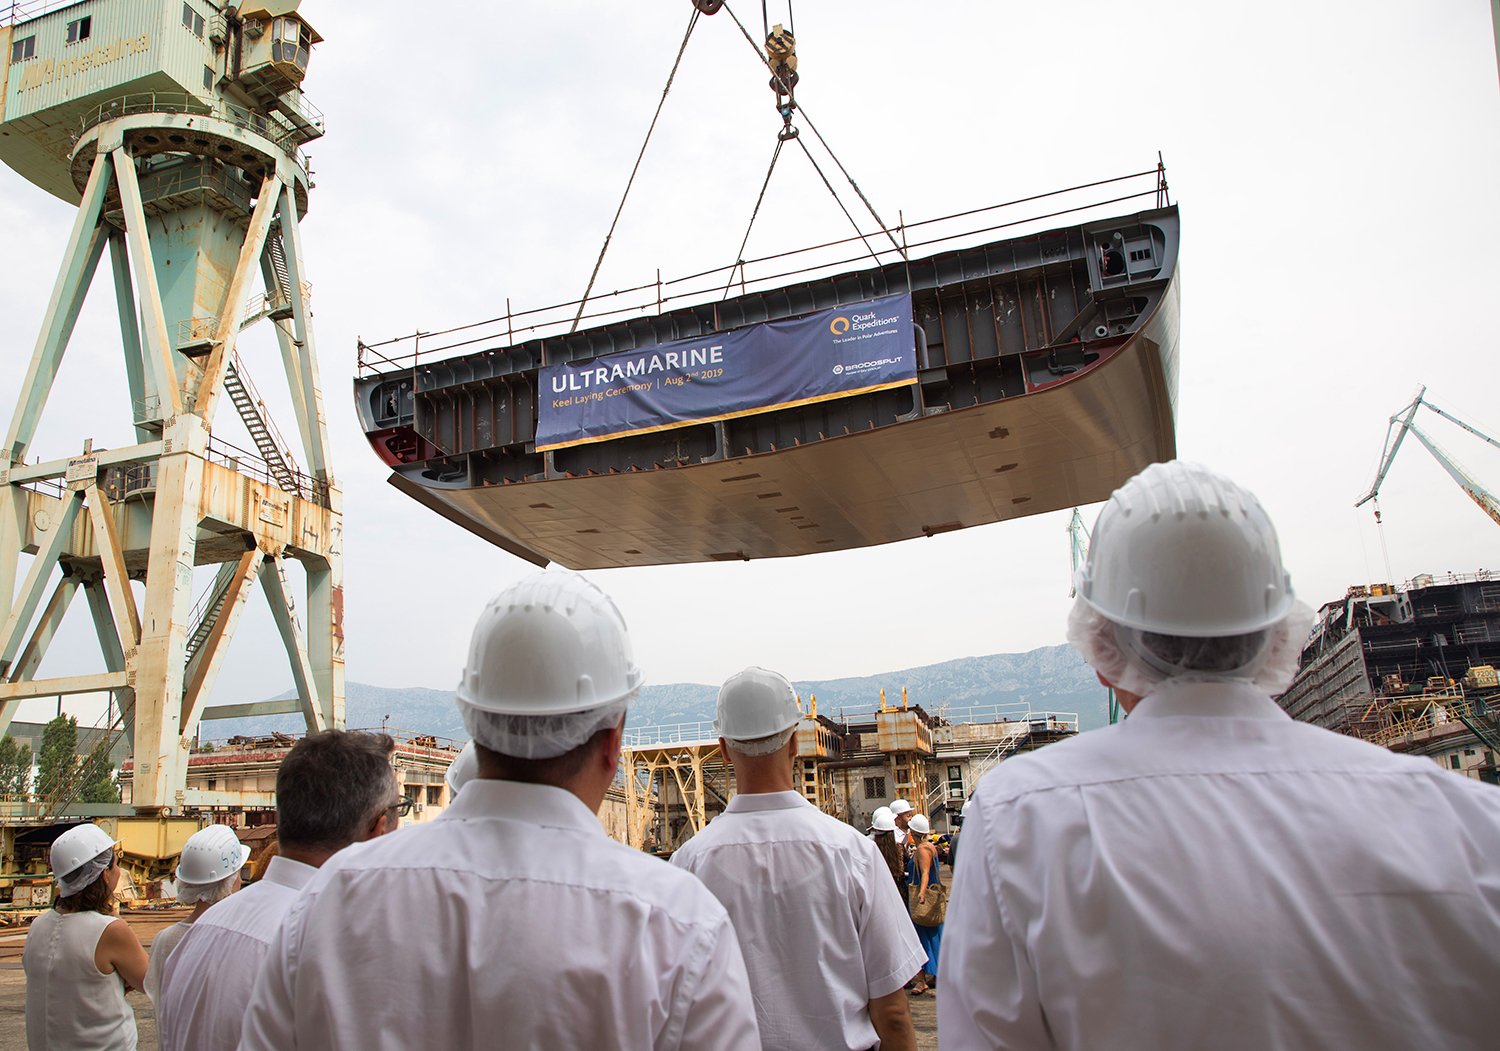 Invited guests watch as the keel of Ultramarine is lowered into place for the ceremony